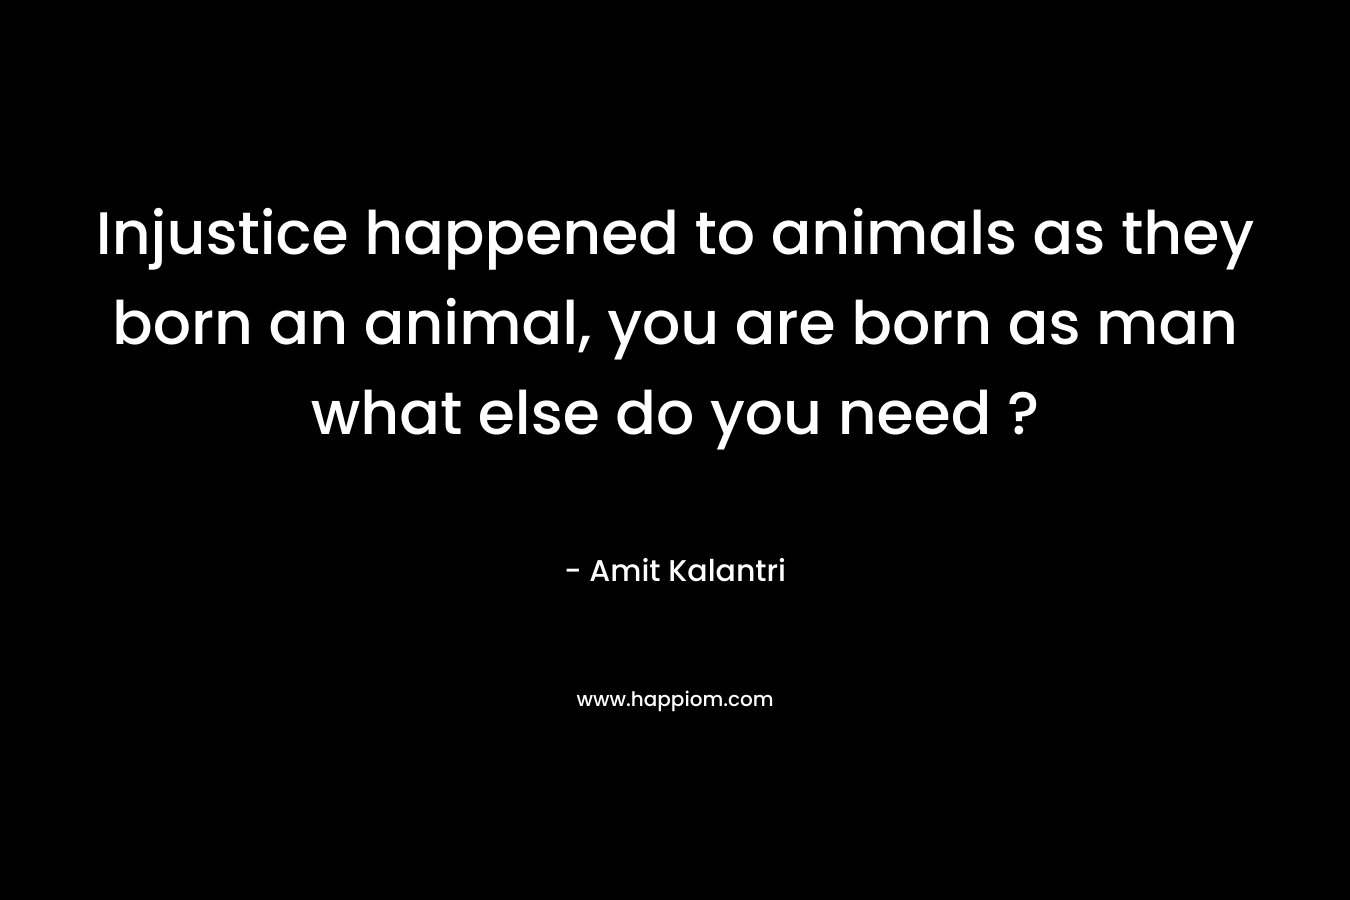 Injustice happened to animals as they born an animal, you are born as man what else do you need ?